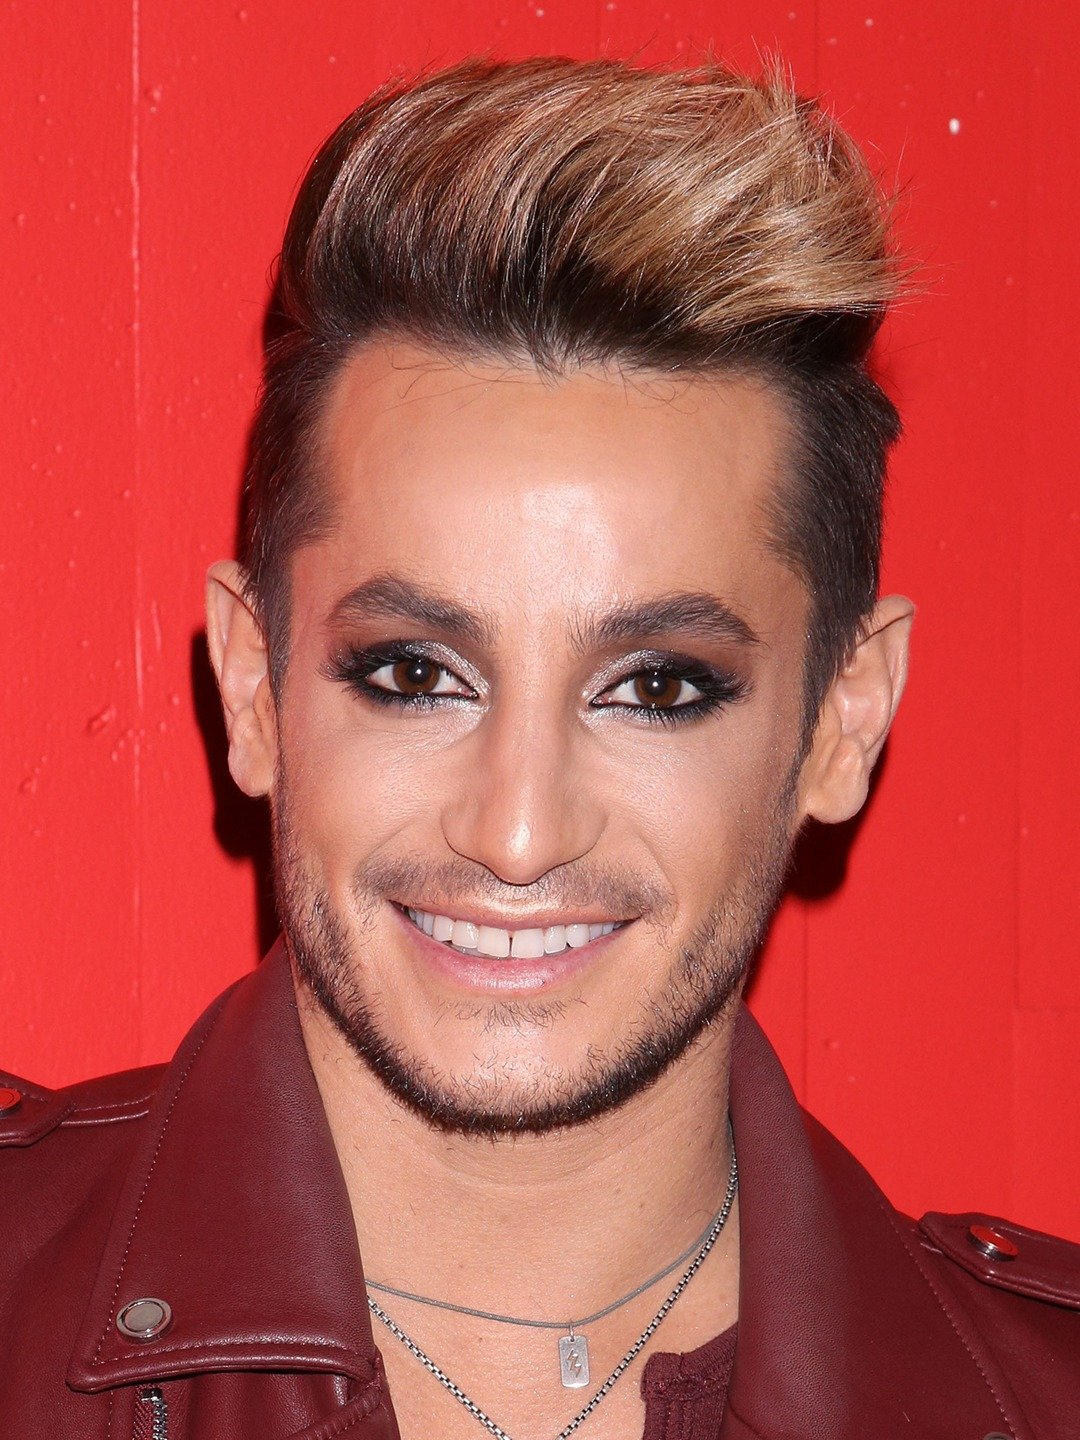 How tall is Frankie Grande?